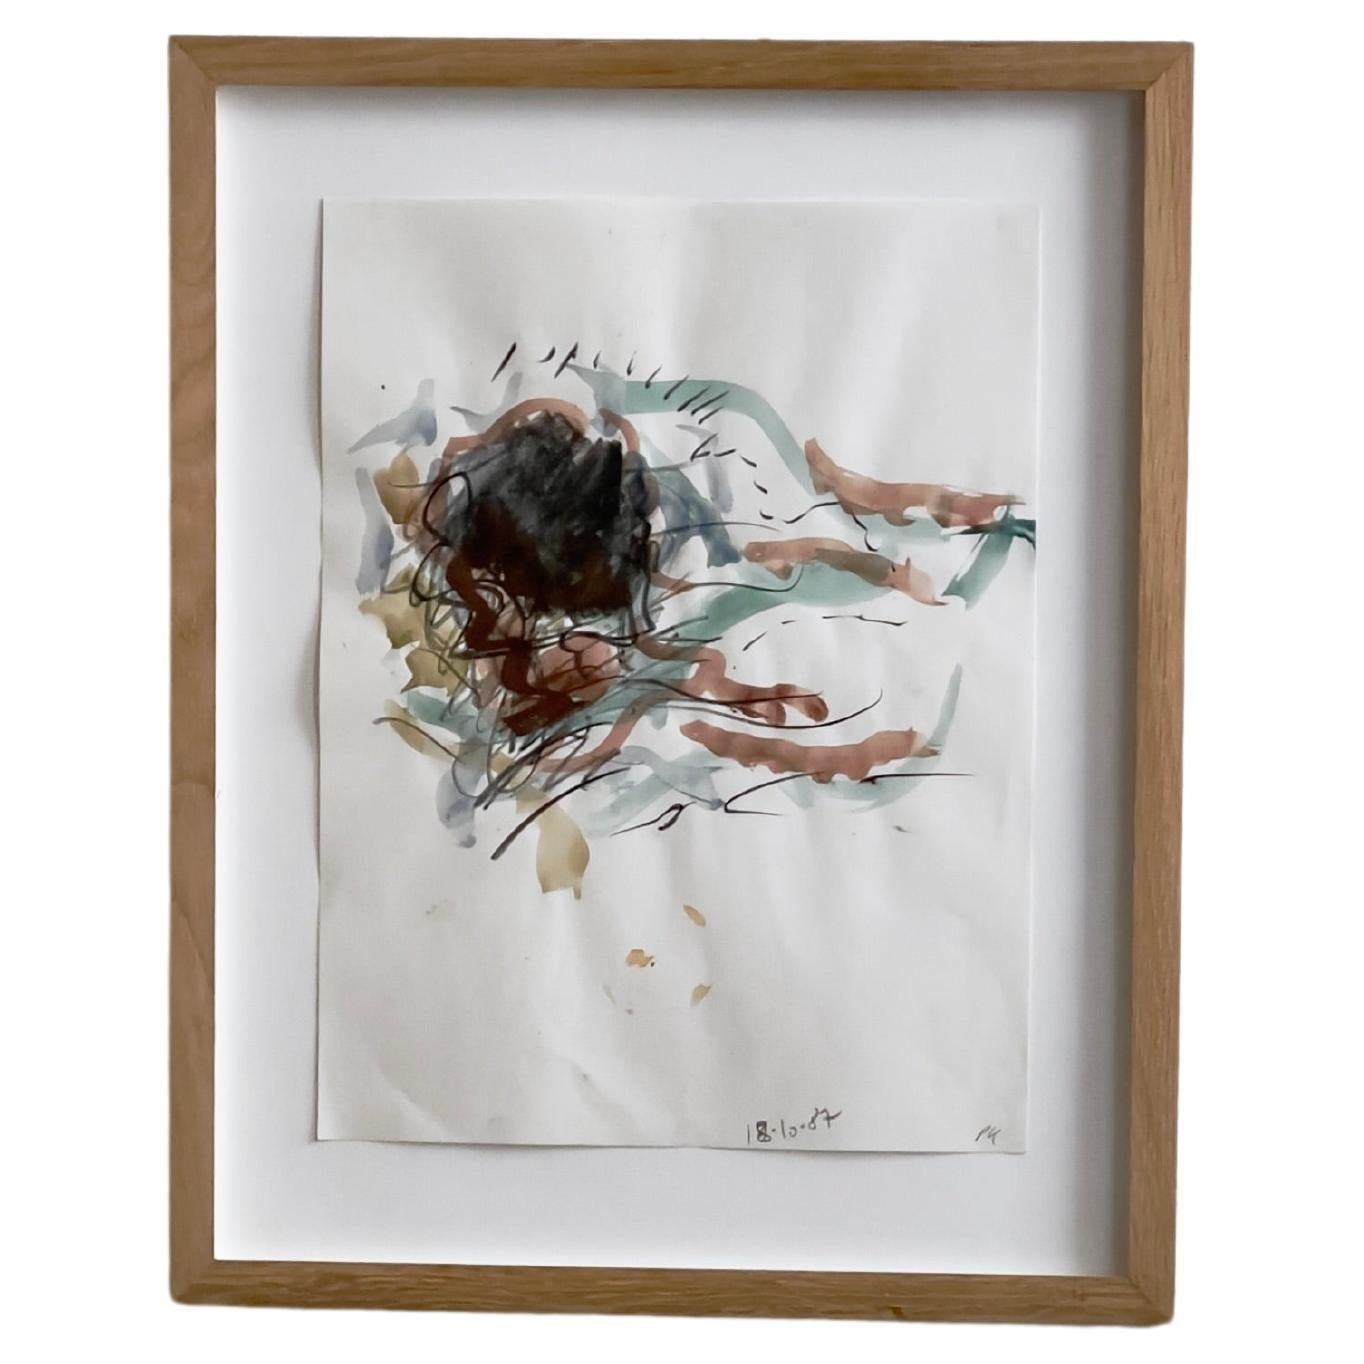 Unique work by Per Kirkeby, Untitled, 1987, Gouache 54 cm x 43 cm in oak frame For Sale